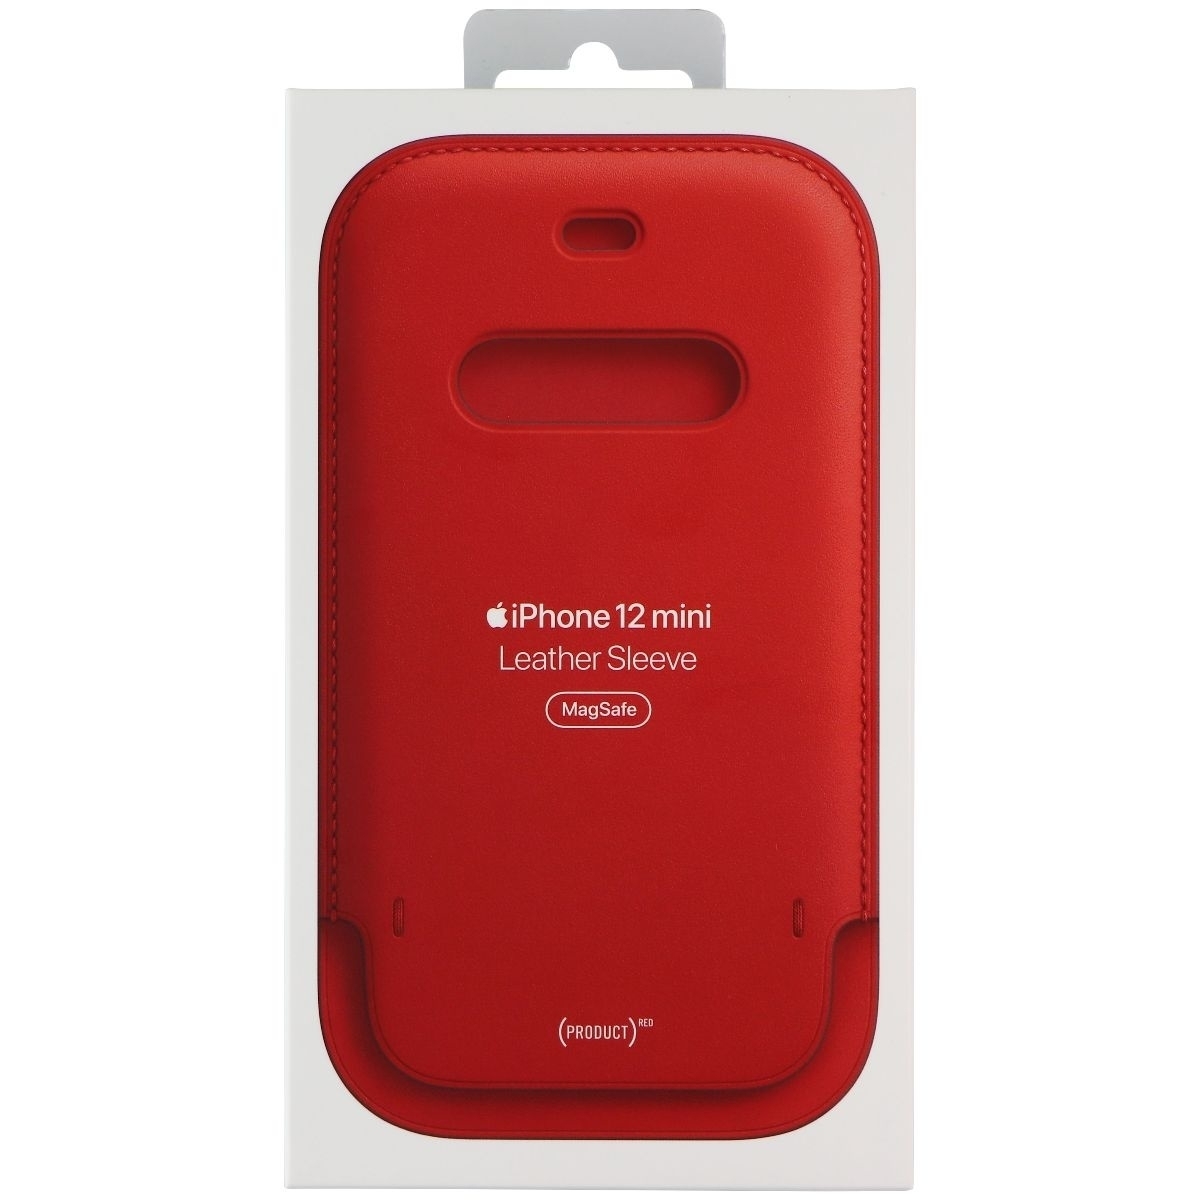 Apple Leather Sleeve With MagSafe For IPhone 12 Mini - (Product) RED